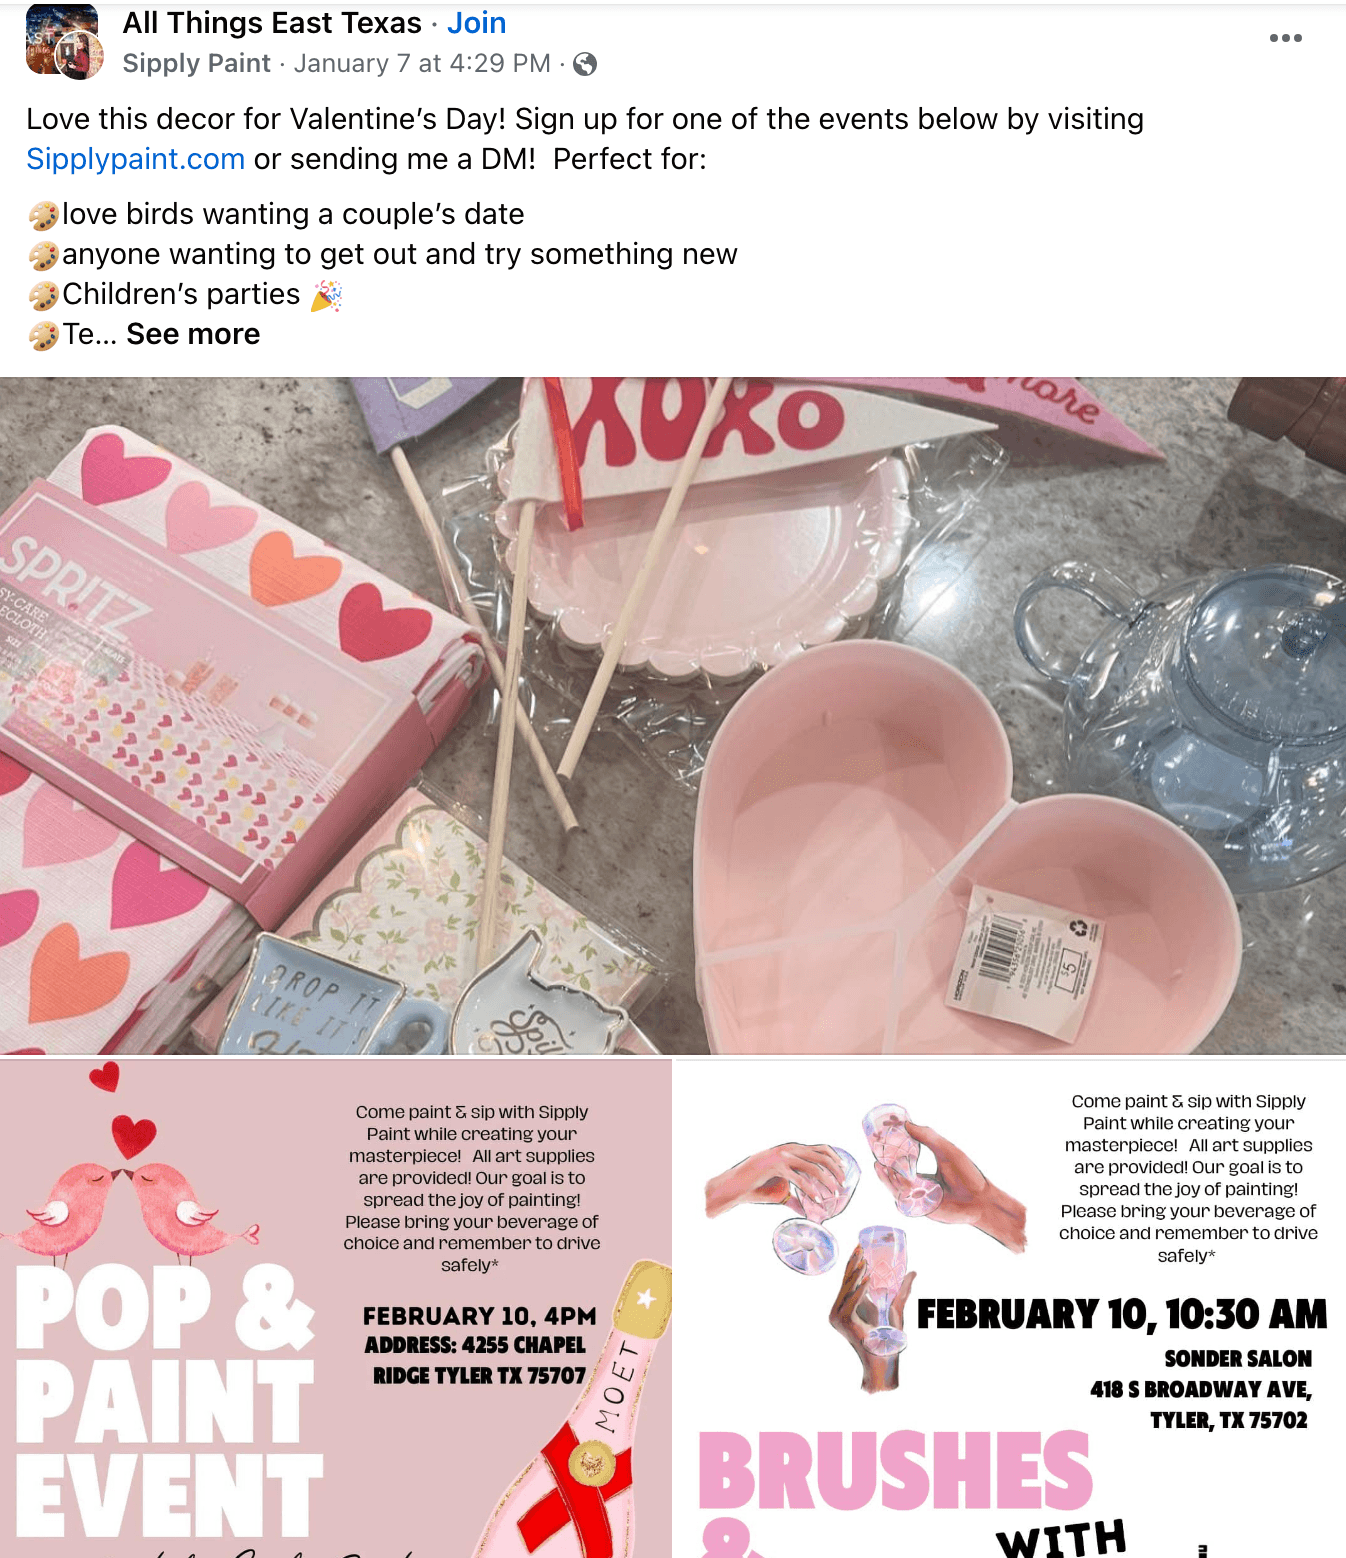 All Things East Texas Valentine's Day workshops